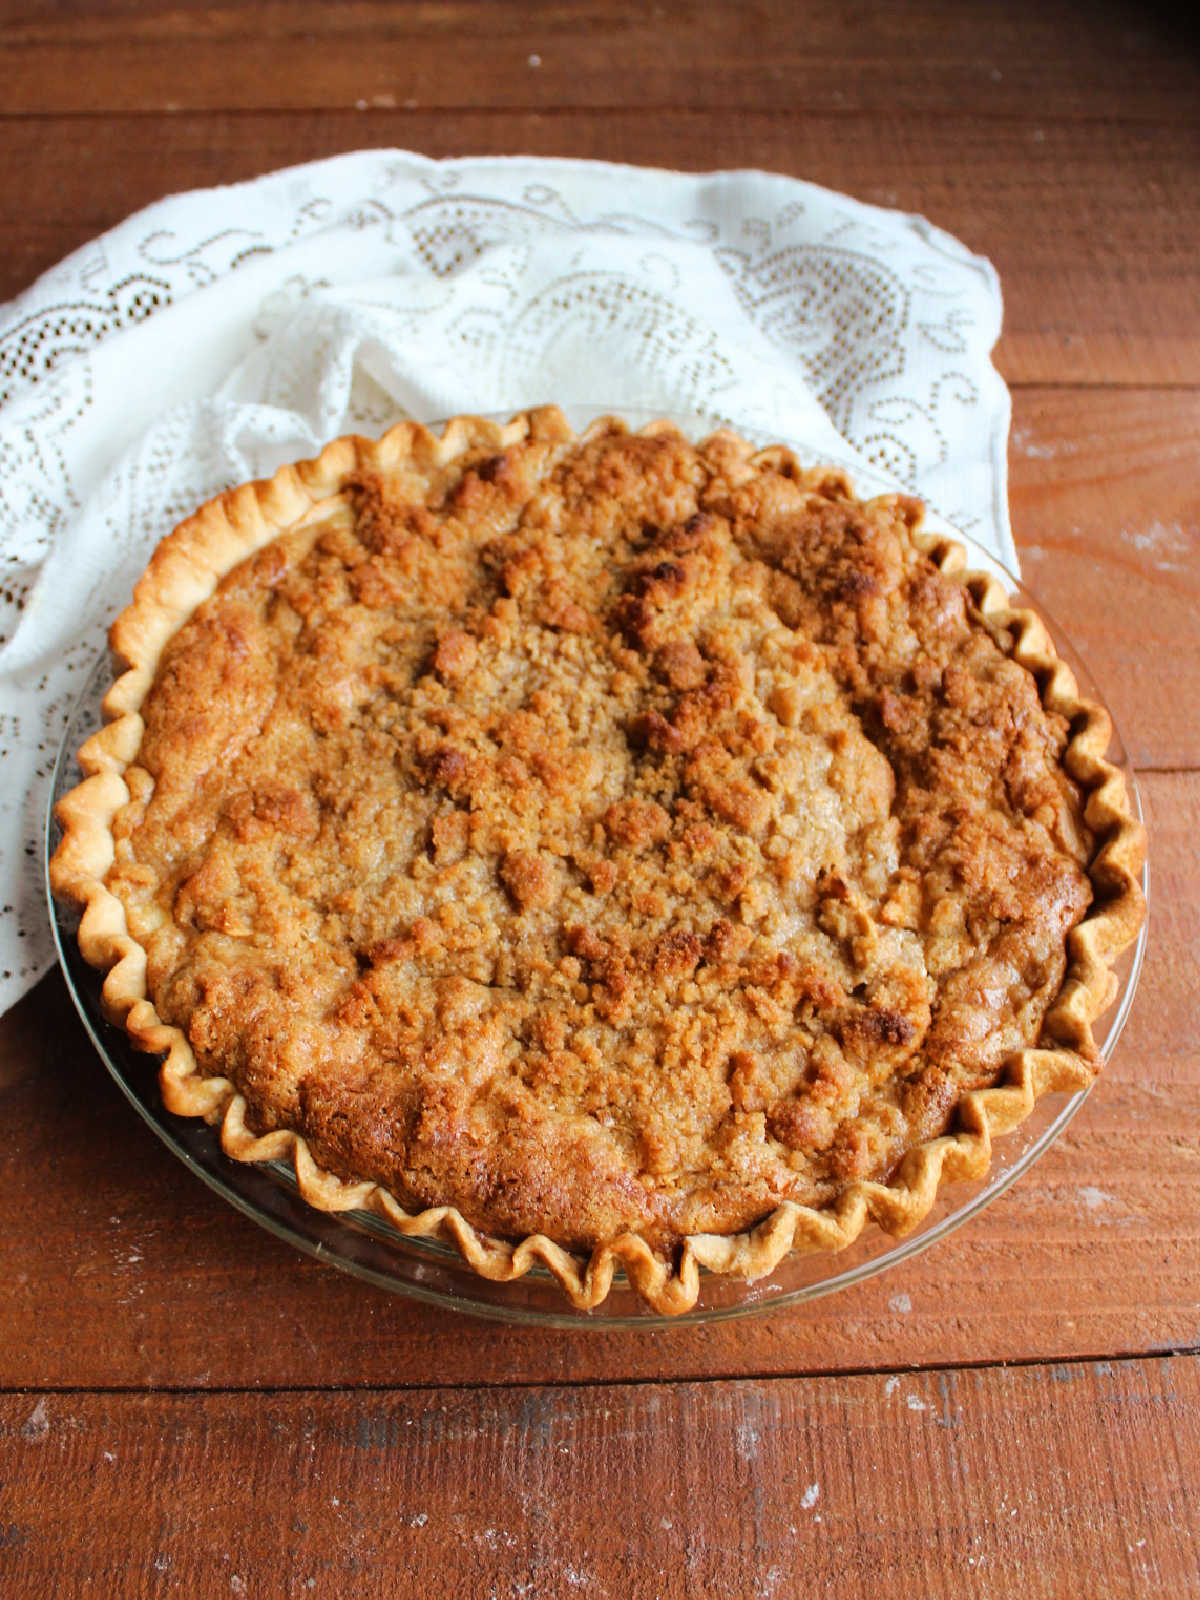 Fresh baked condensed milk apple pie showing the golden brown pie crust and browned streusel topping.